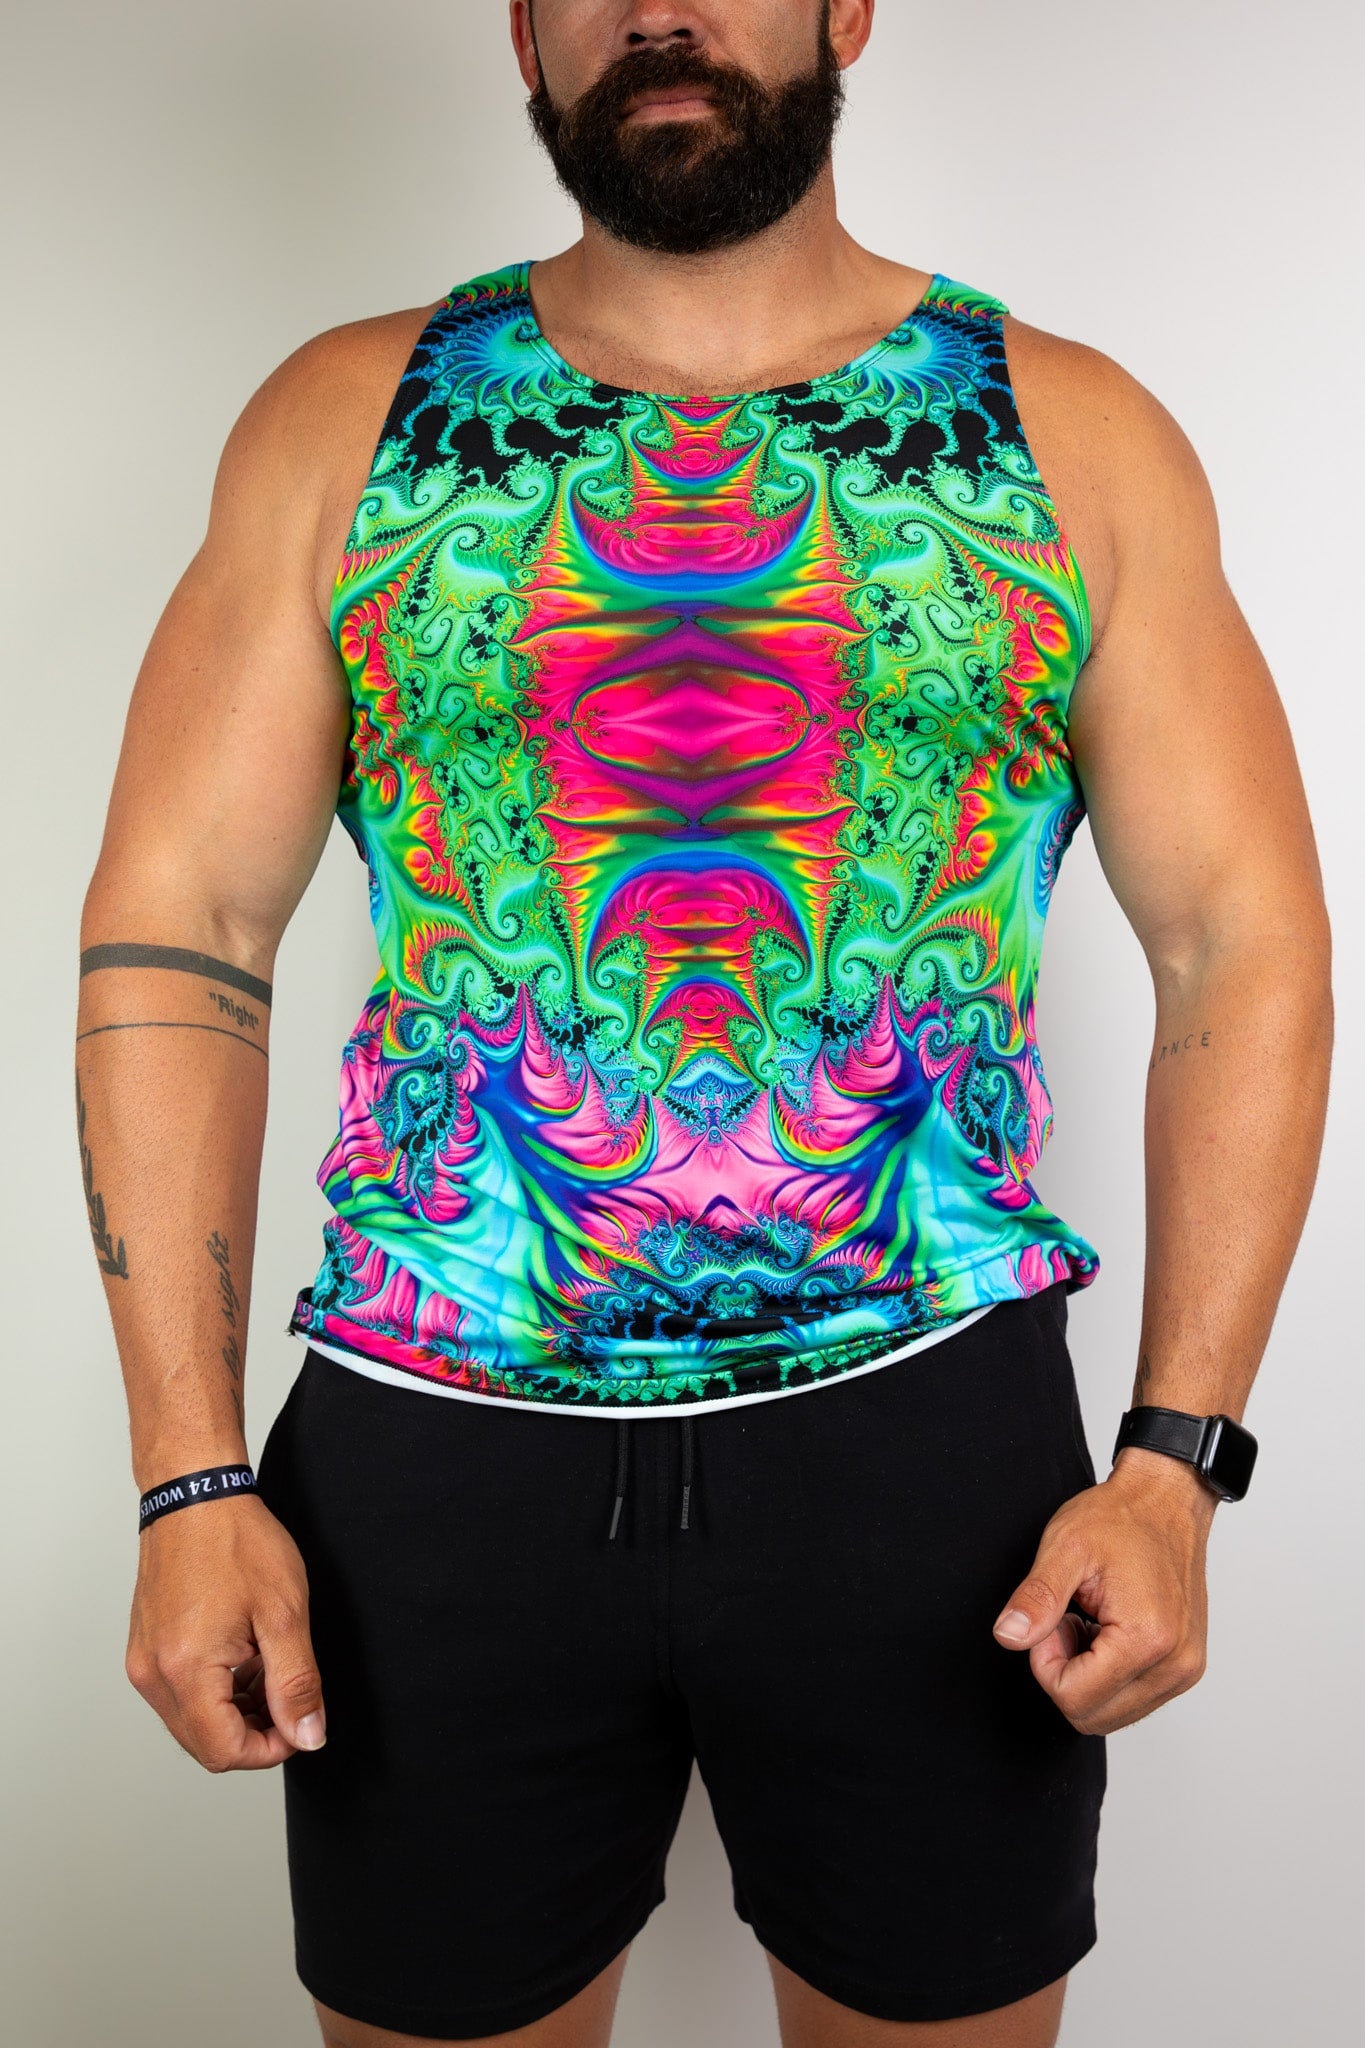  Model wearing a vibrant, psychedelic tank top with colorful patterns, ideal for raves. Freedom Rave Wear offers unique festival fashion.